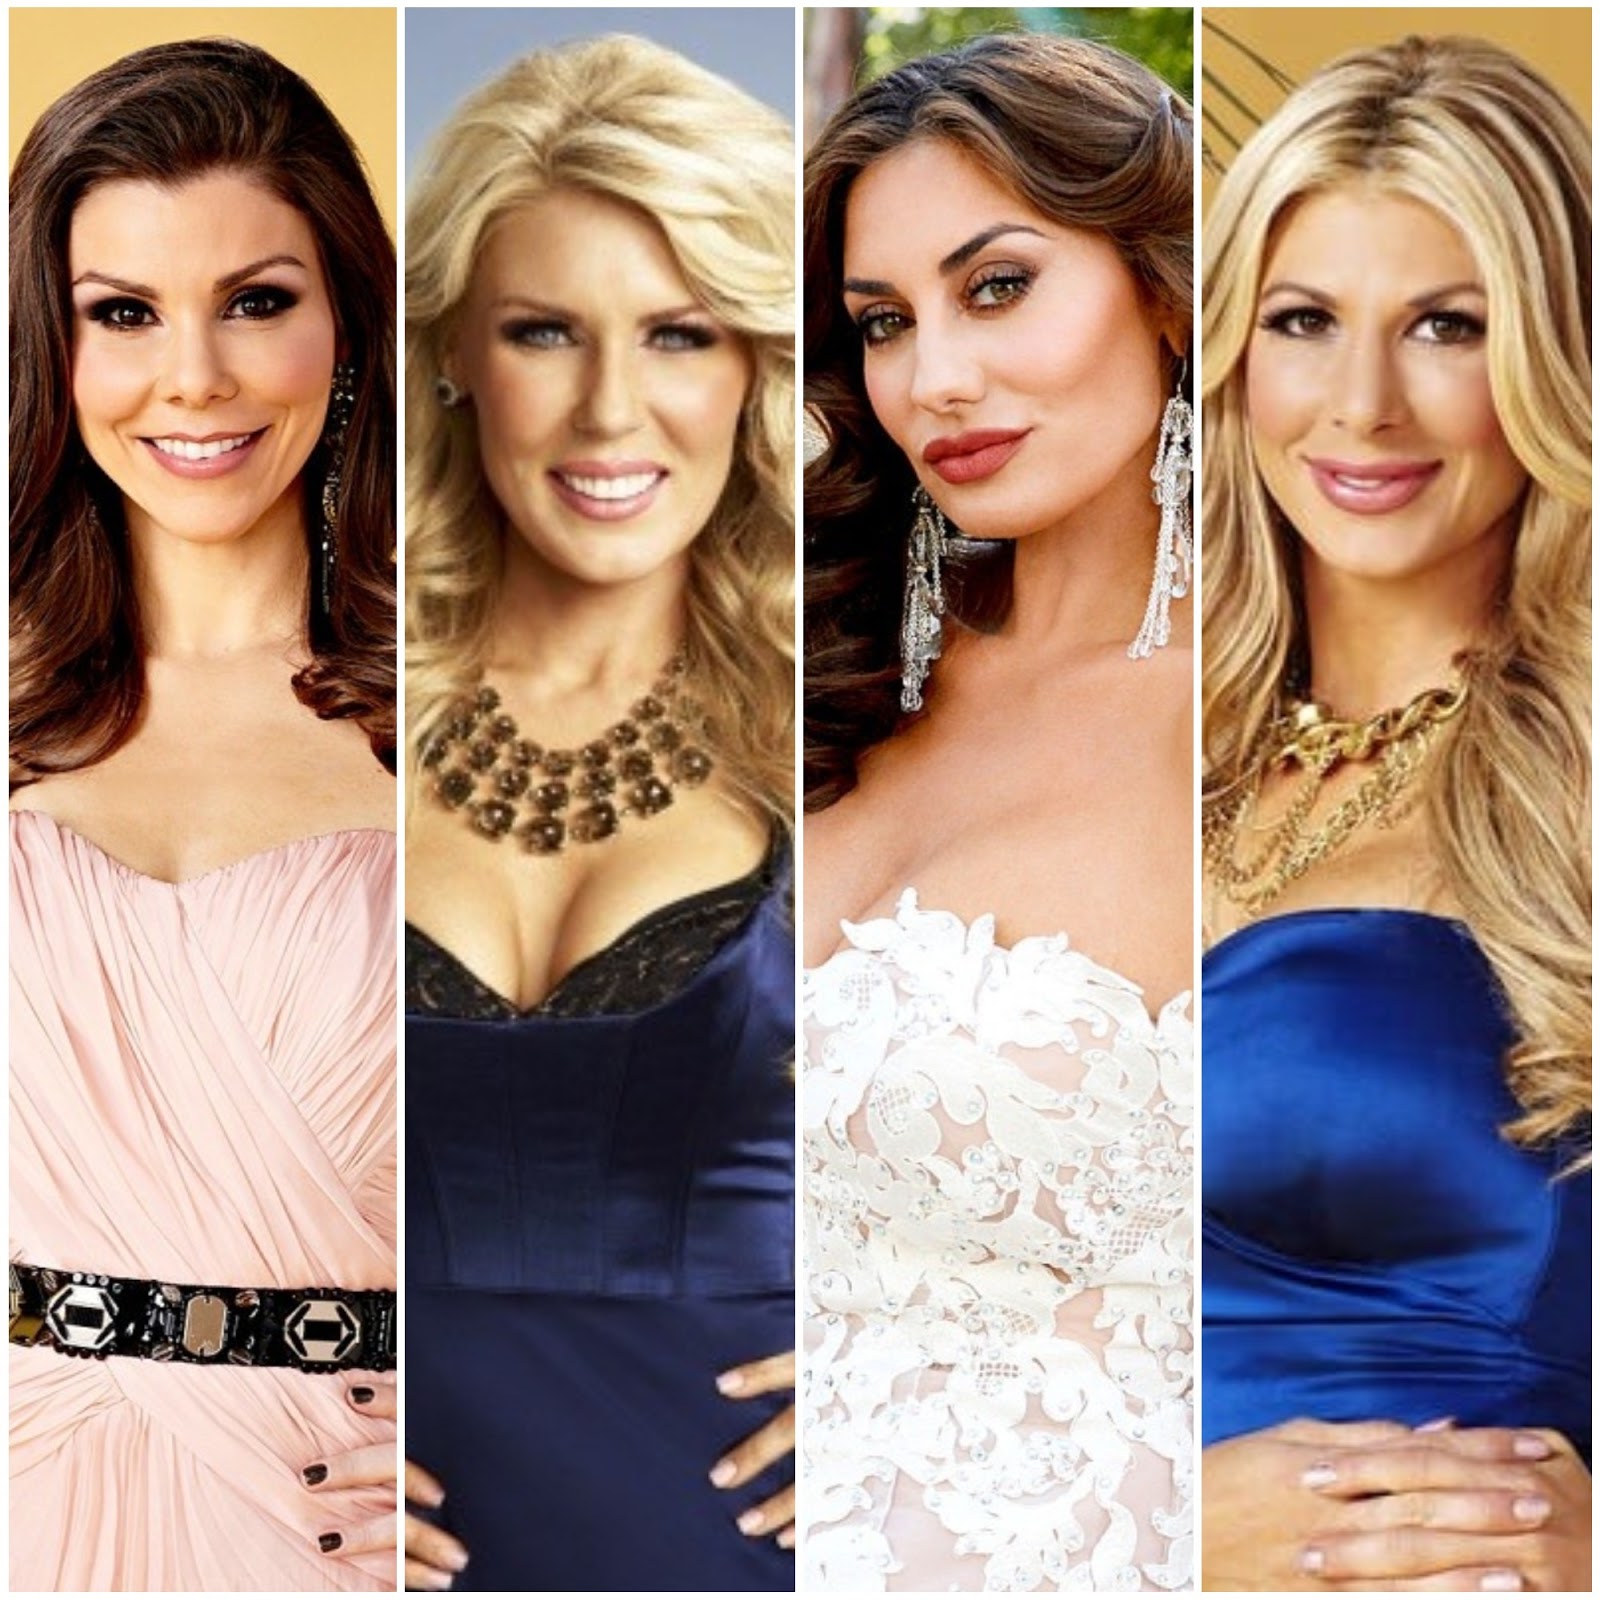 Real Housewives of Orange County may lose 3 cast members 